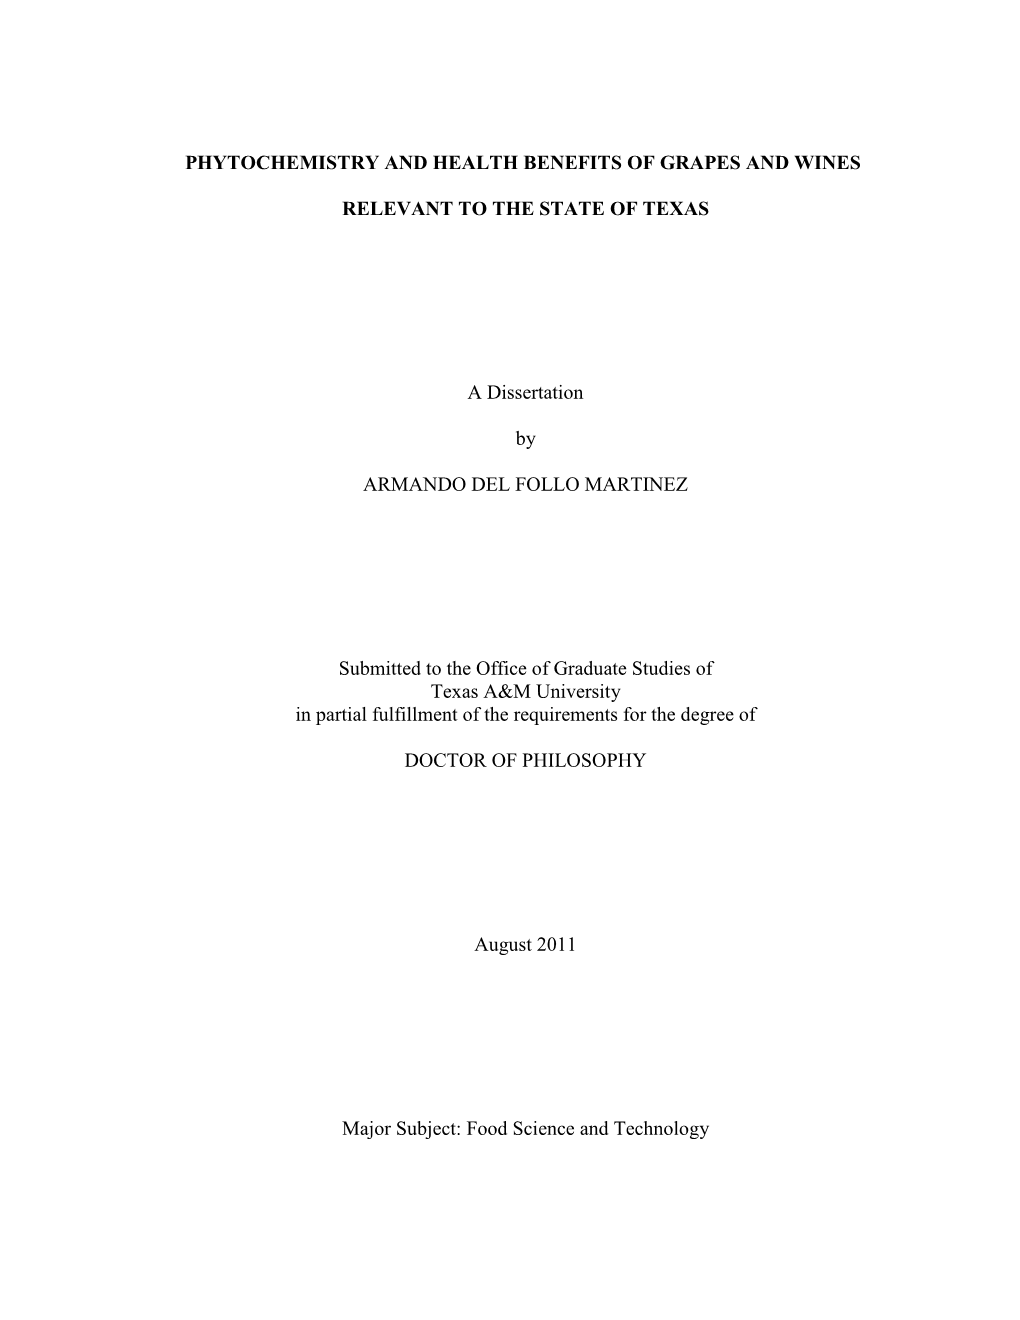 PHYTOCHEMISTRY and HEALTH BENEFITS of GRAPES and WINES RELEVANT to the STATE of TEXAS a Dissertation by ARMANDO DEL FOLLO MARTI